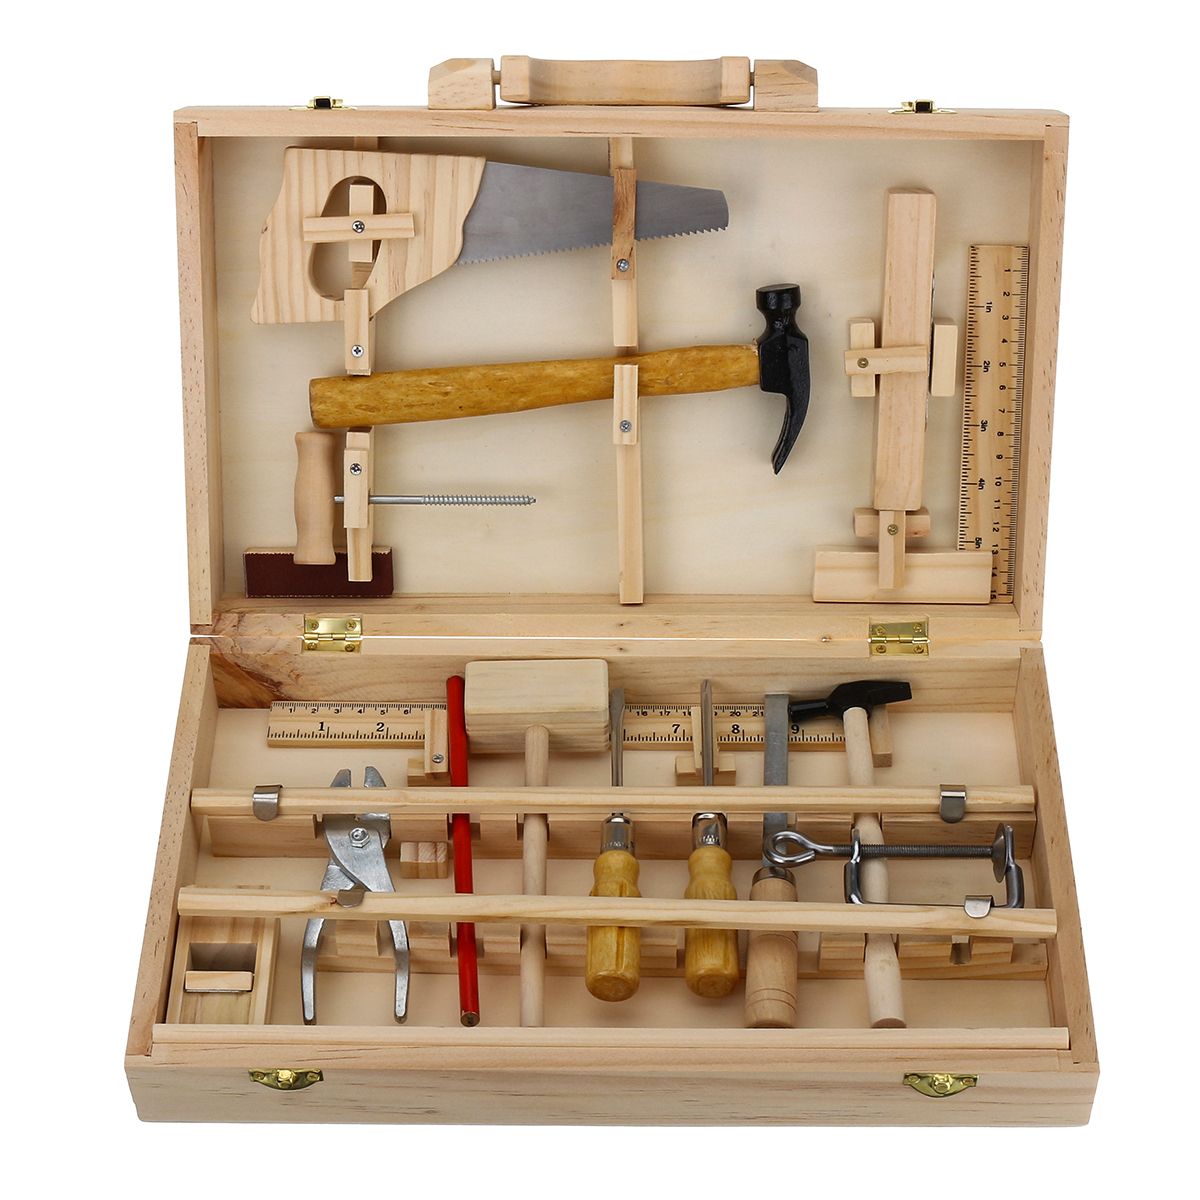 Kid-Wooden-Storage-Toy-Tool-Set-ToolBox-DIY-Educational-Bench-Learning-Role-Play-1253694